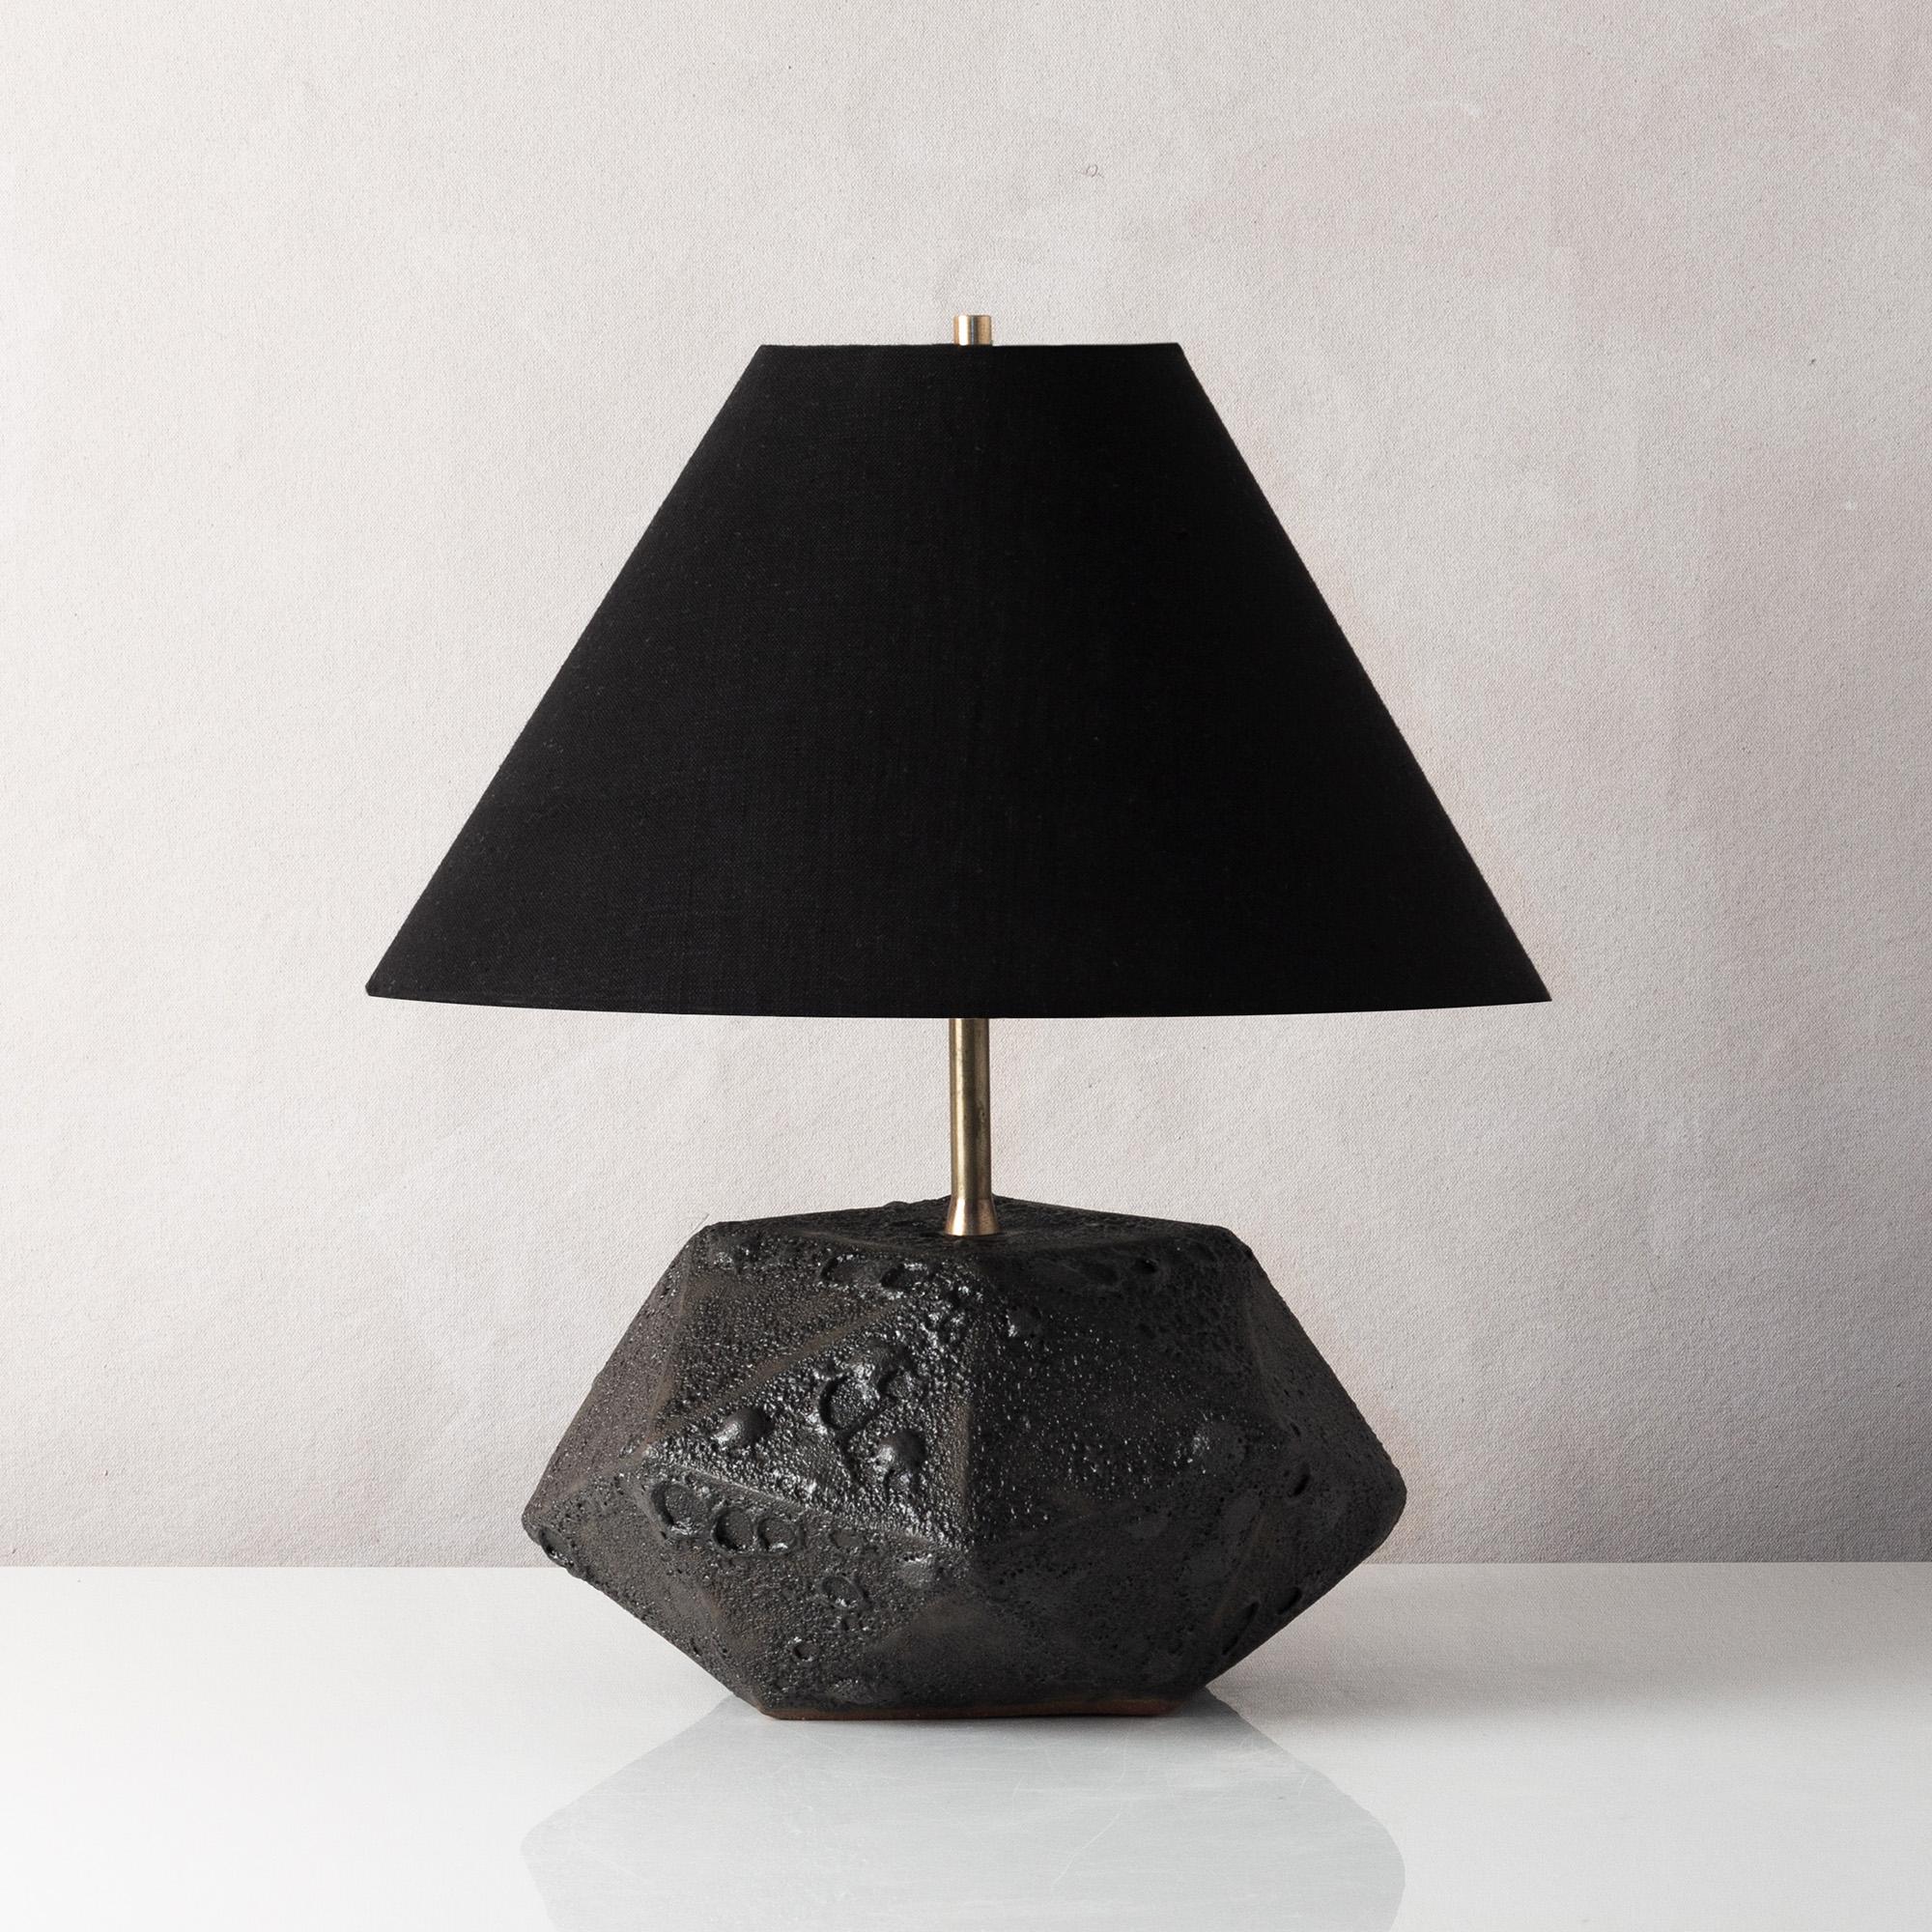 This dramatic black ceramic table lamp features a complex geometric shape, accentuated by a textured black glaze reminiscent of volcanic rock. Each piece is individually handmade and entirely unique. The lamp is finished with raw brass hardware and